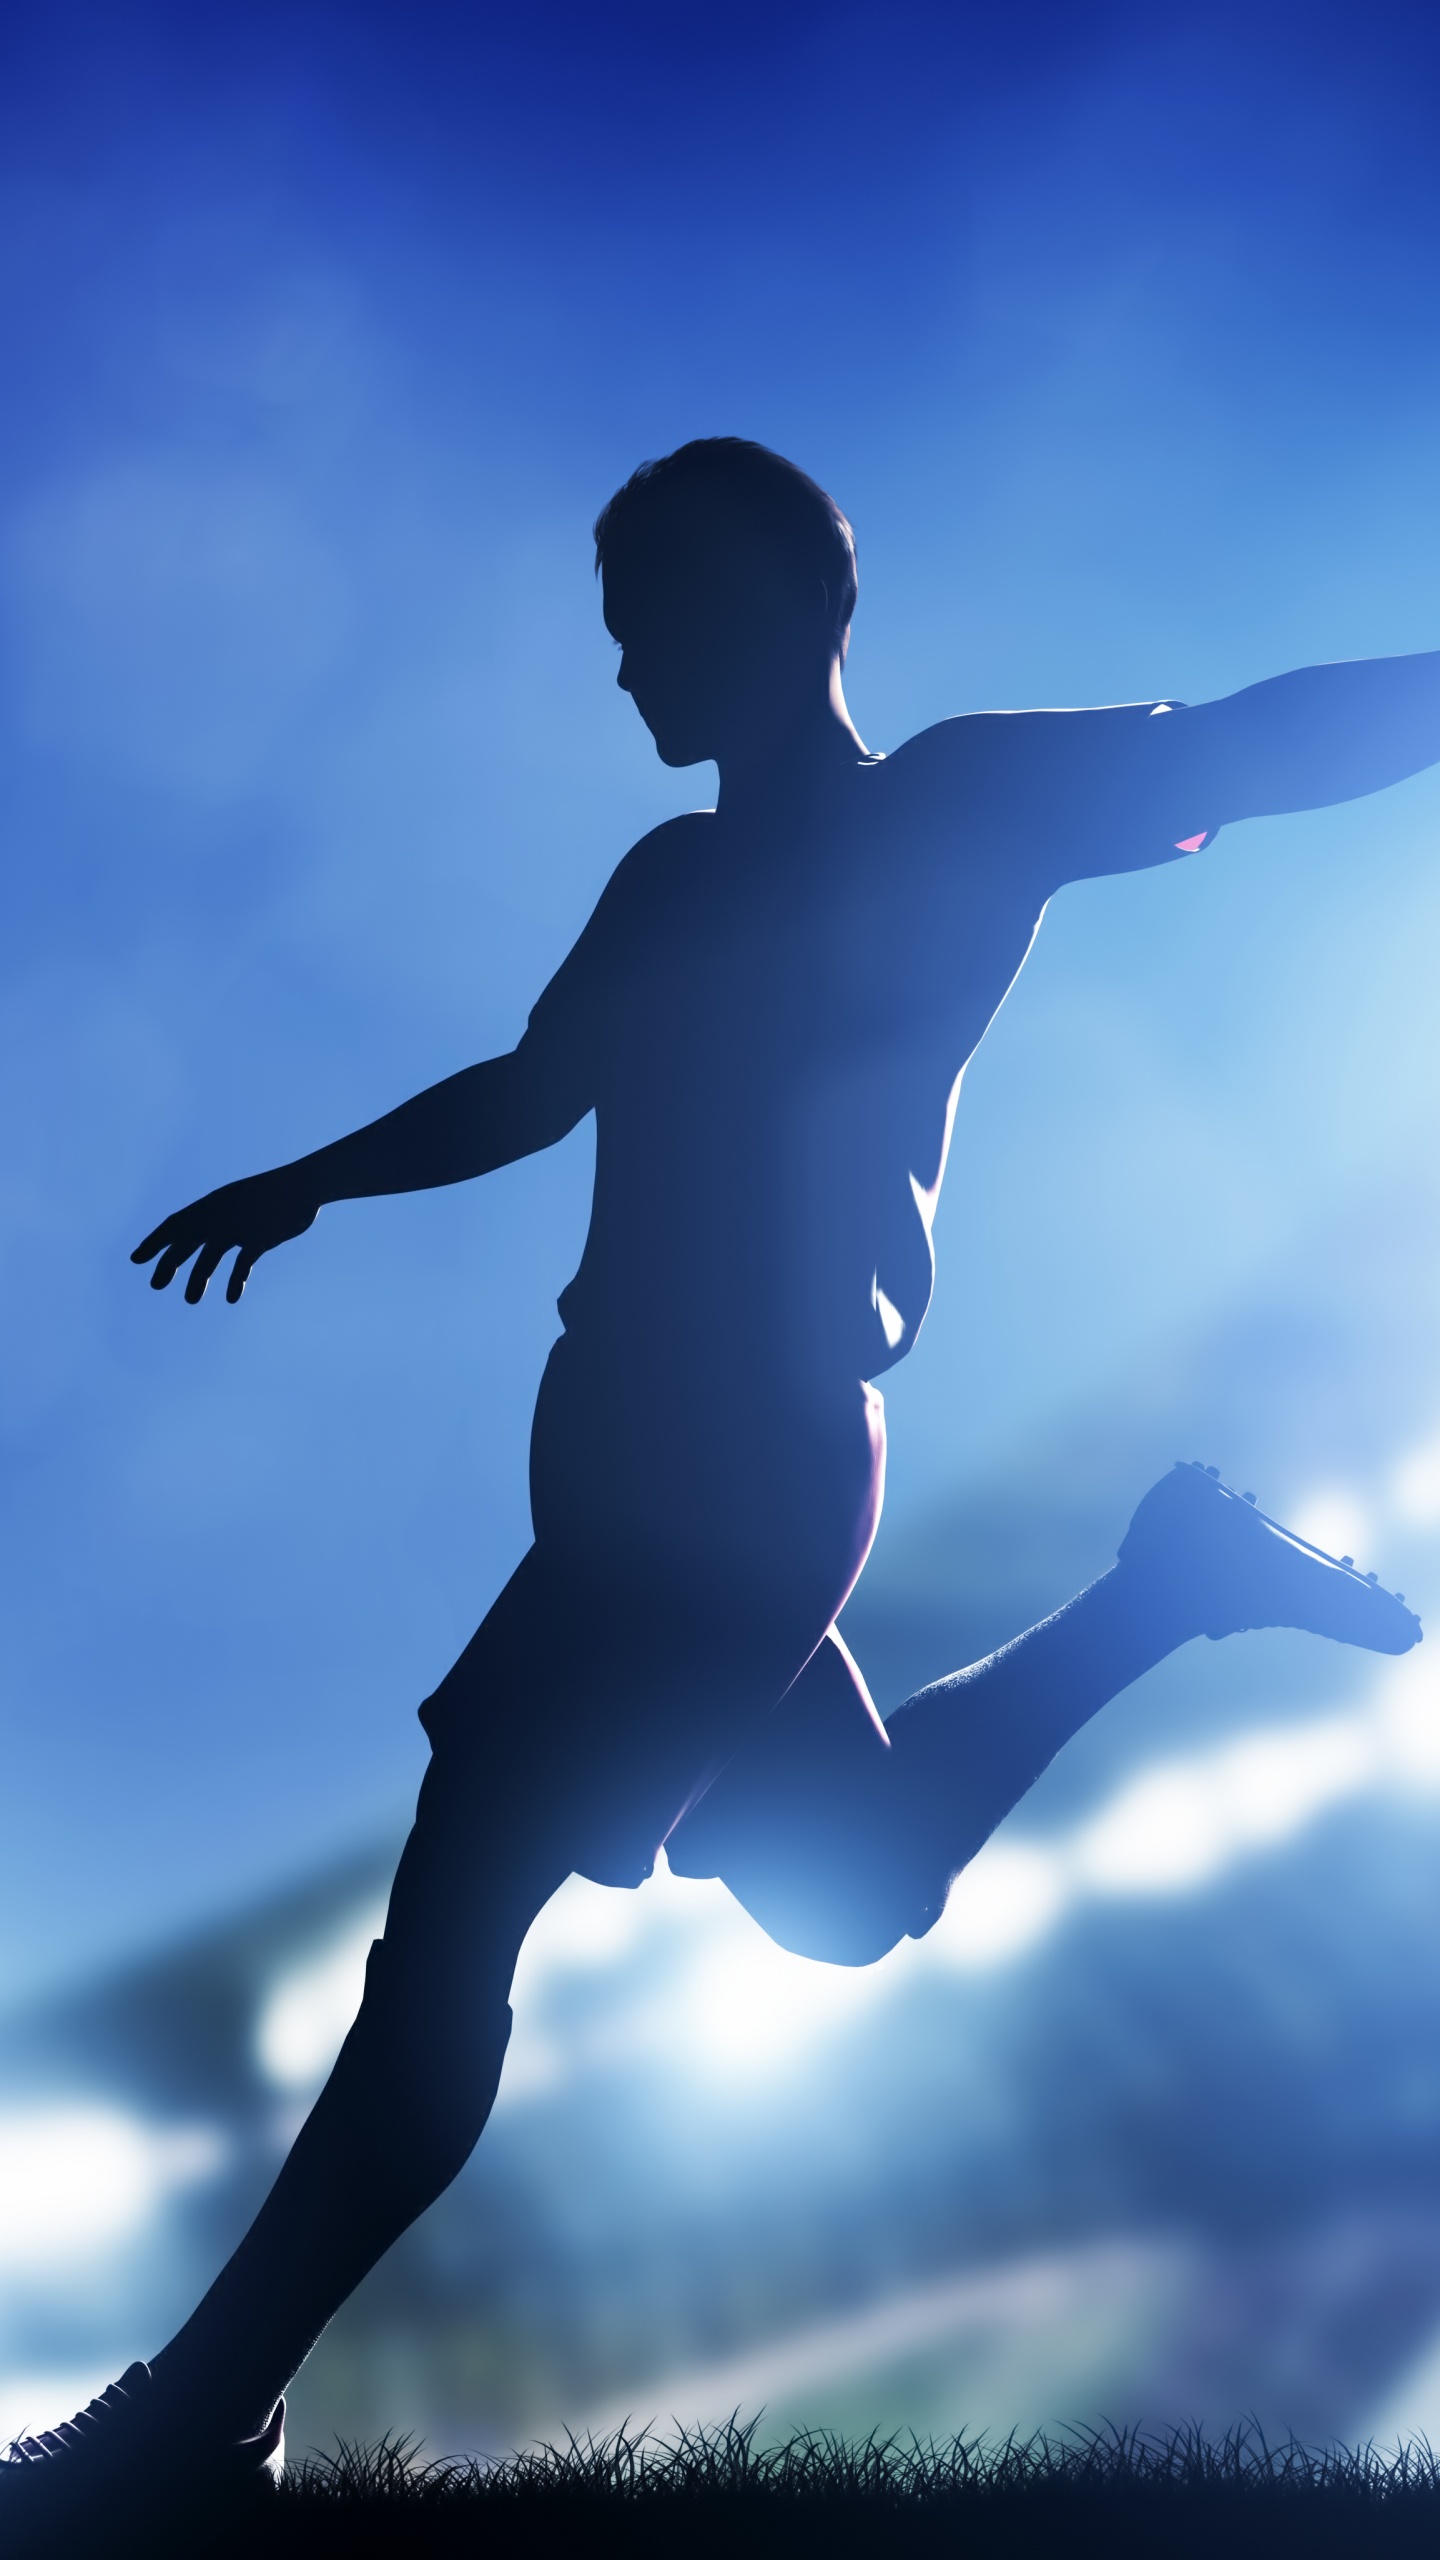 Man in Black Shorts Playing Soccer Ball. Wallpaper in 1440x2560 Resolution